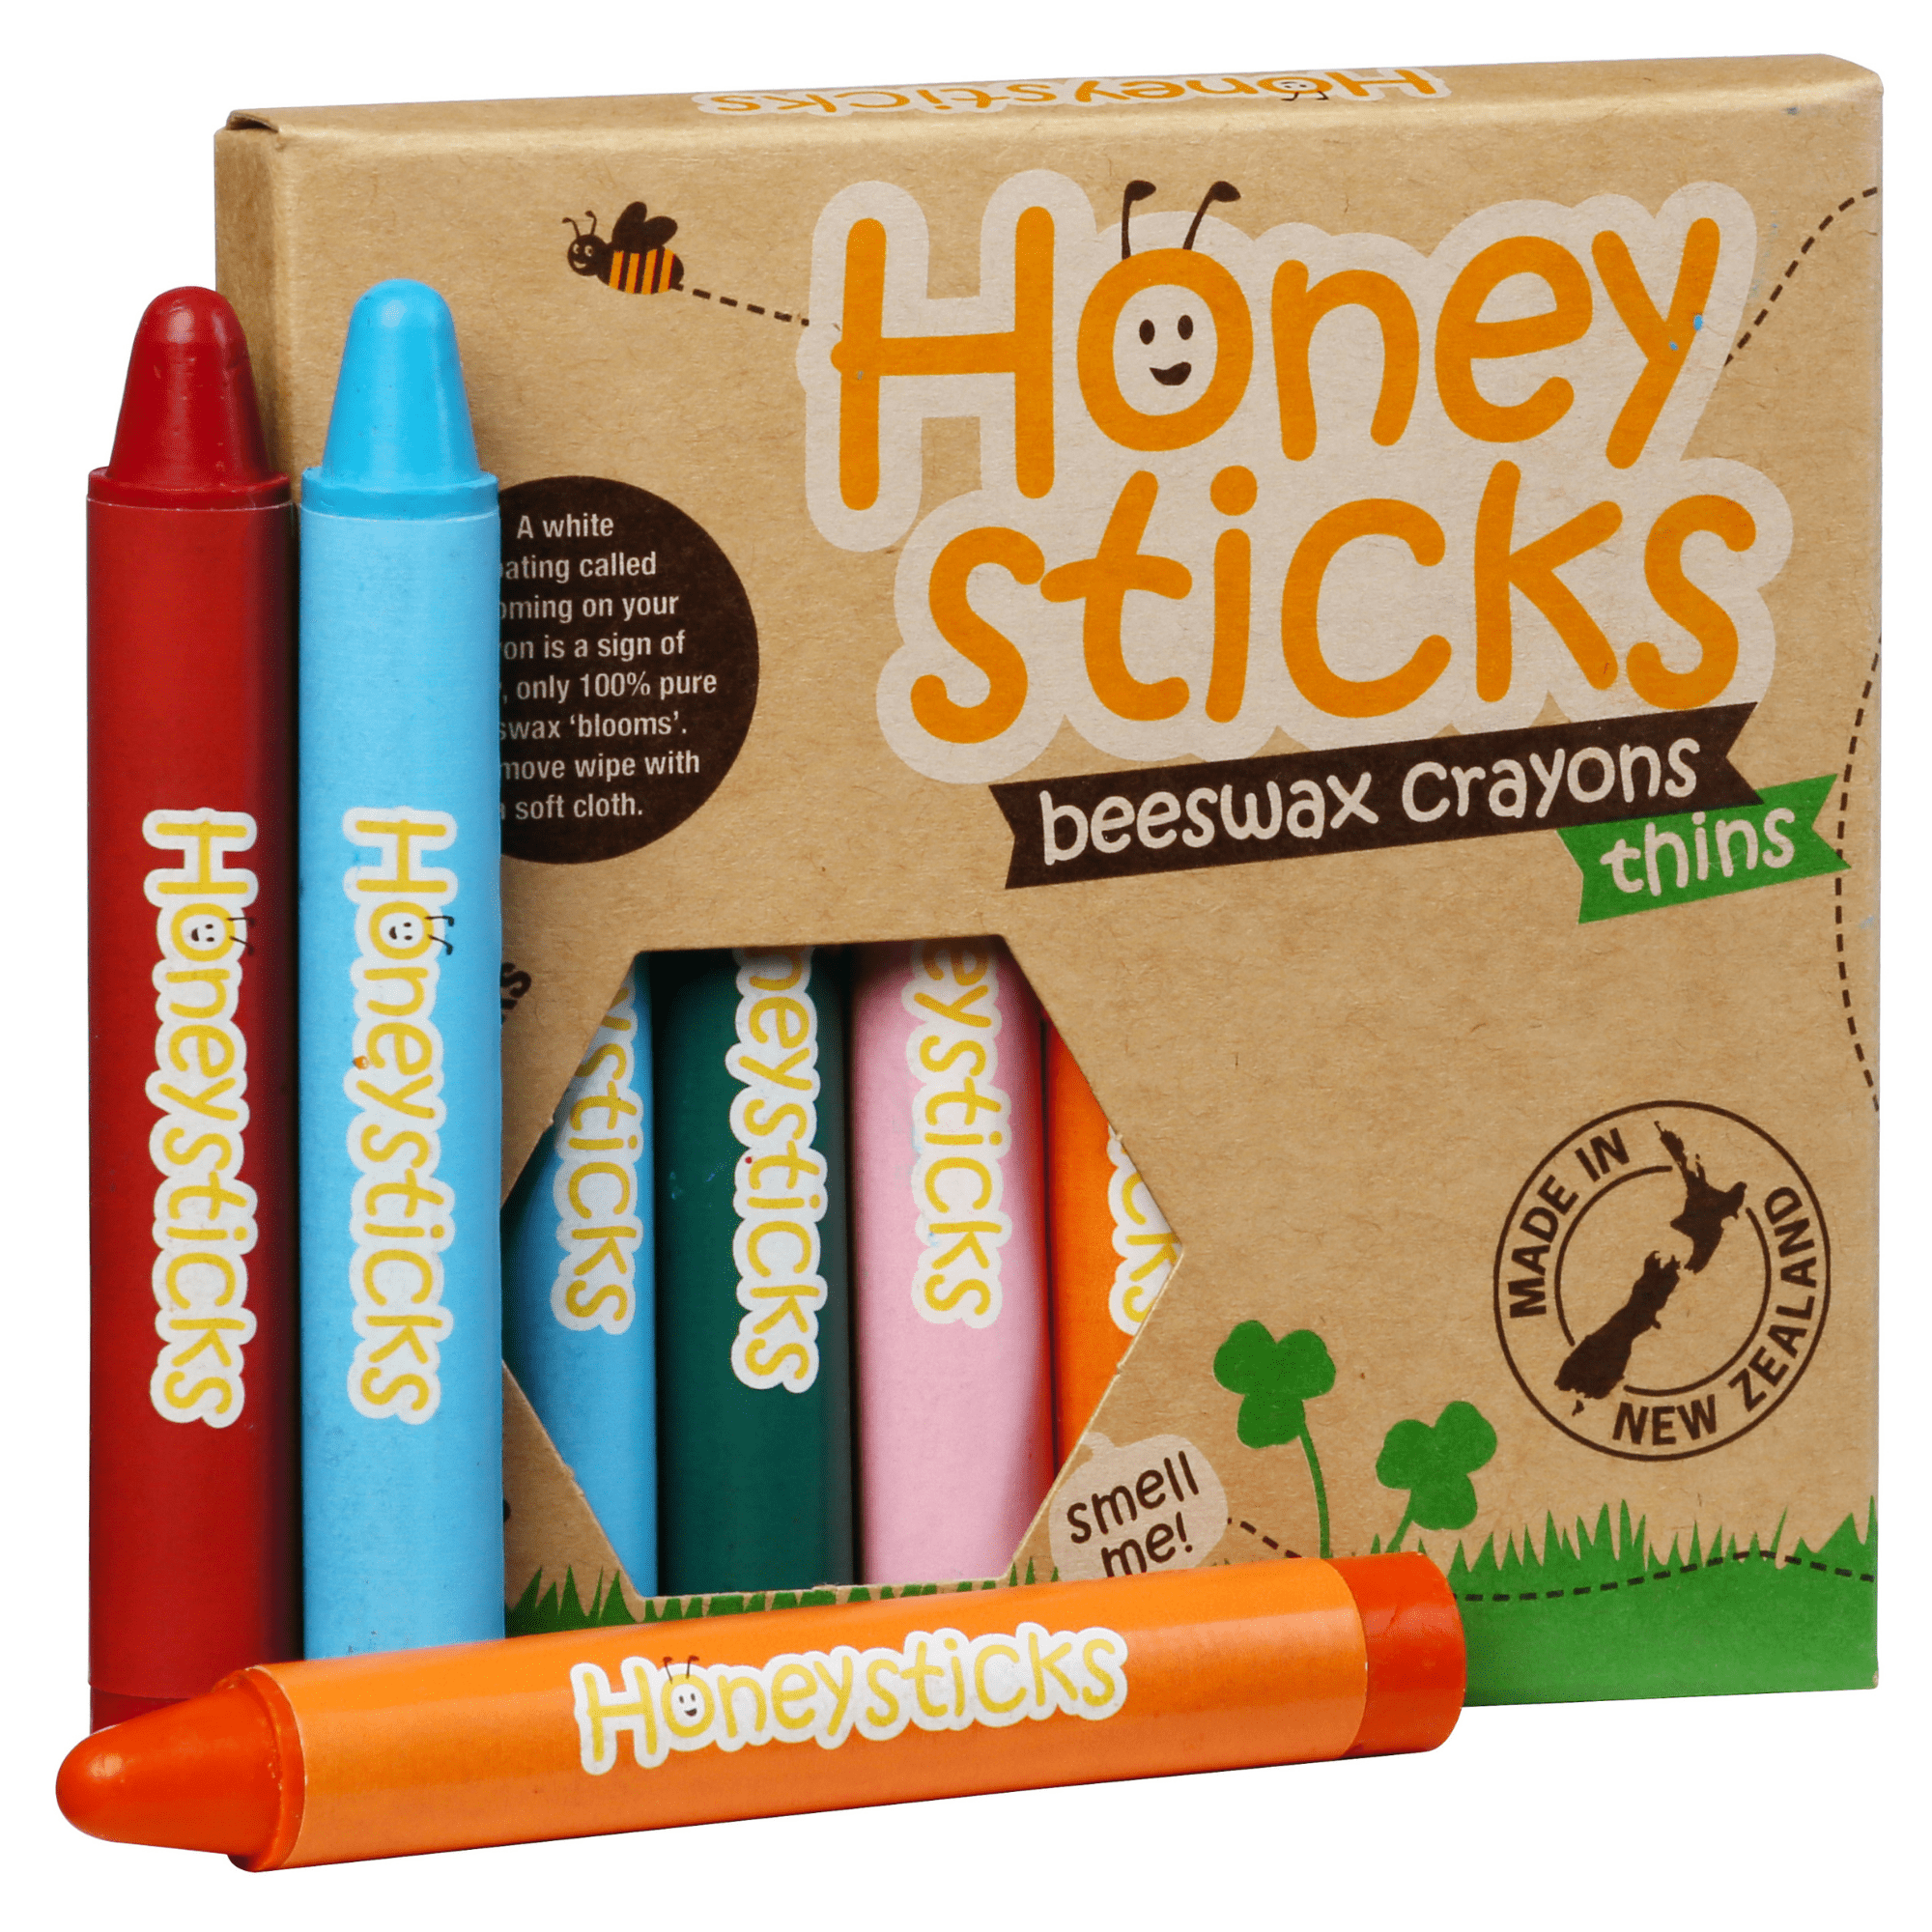 Honeysticks Triangular Crayons (10 Pack) - 100% Pure Beeswax, Food Grade  Colors, Non Toxic Crayons for Baby, Toddlers ages 1-3,2-4, Triangle Shape  for